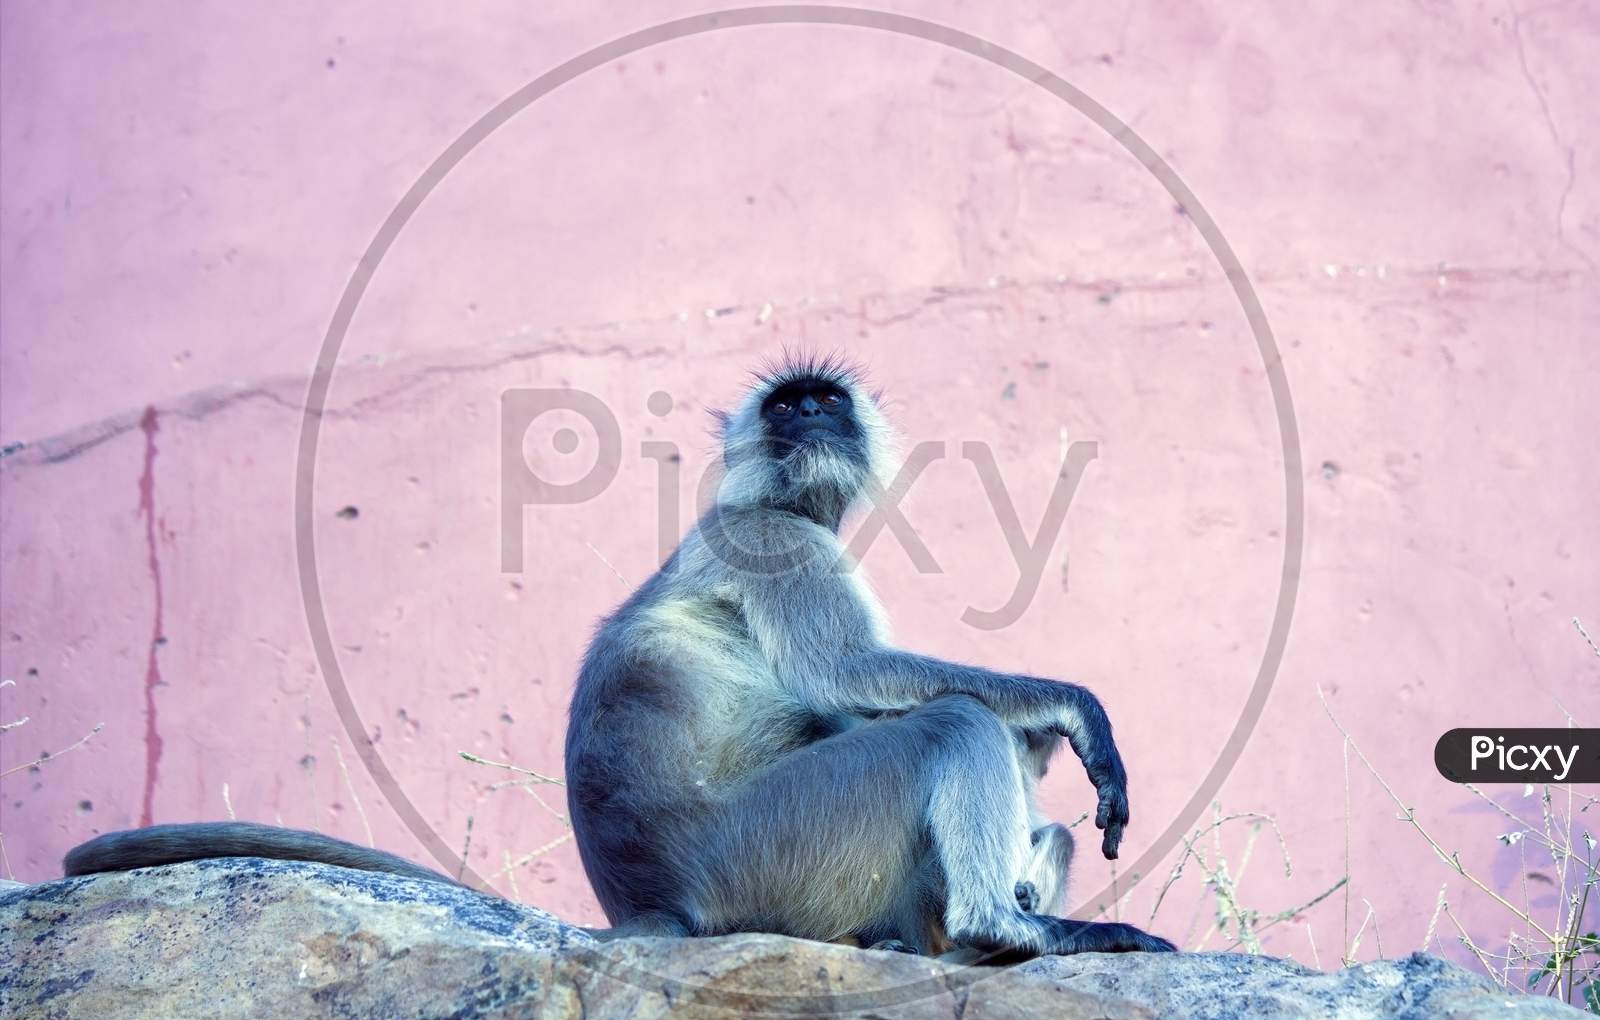 Semnopithecus Also Known As A Gray Langur Primate Posing In Jaipur City Located In Rajasthan State